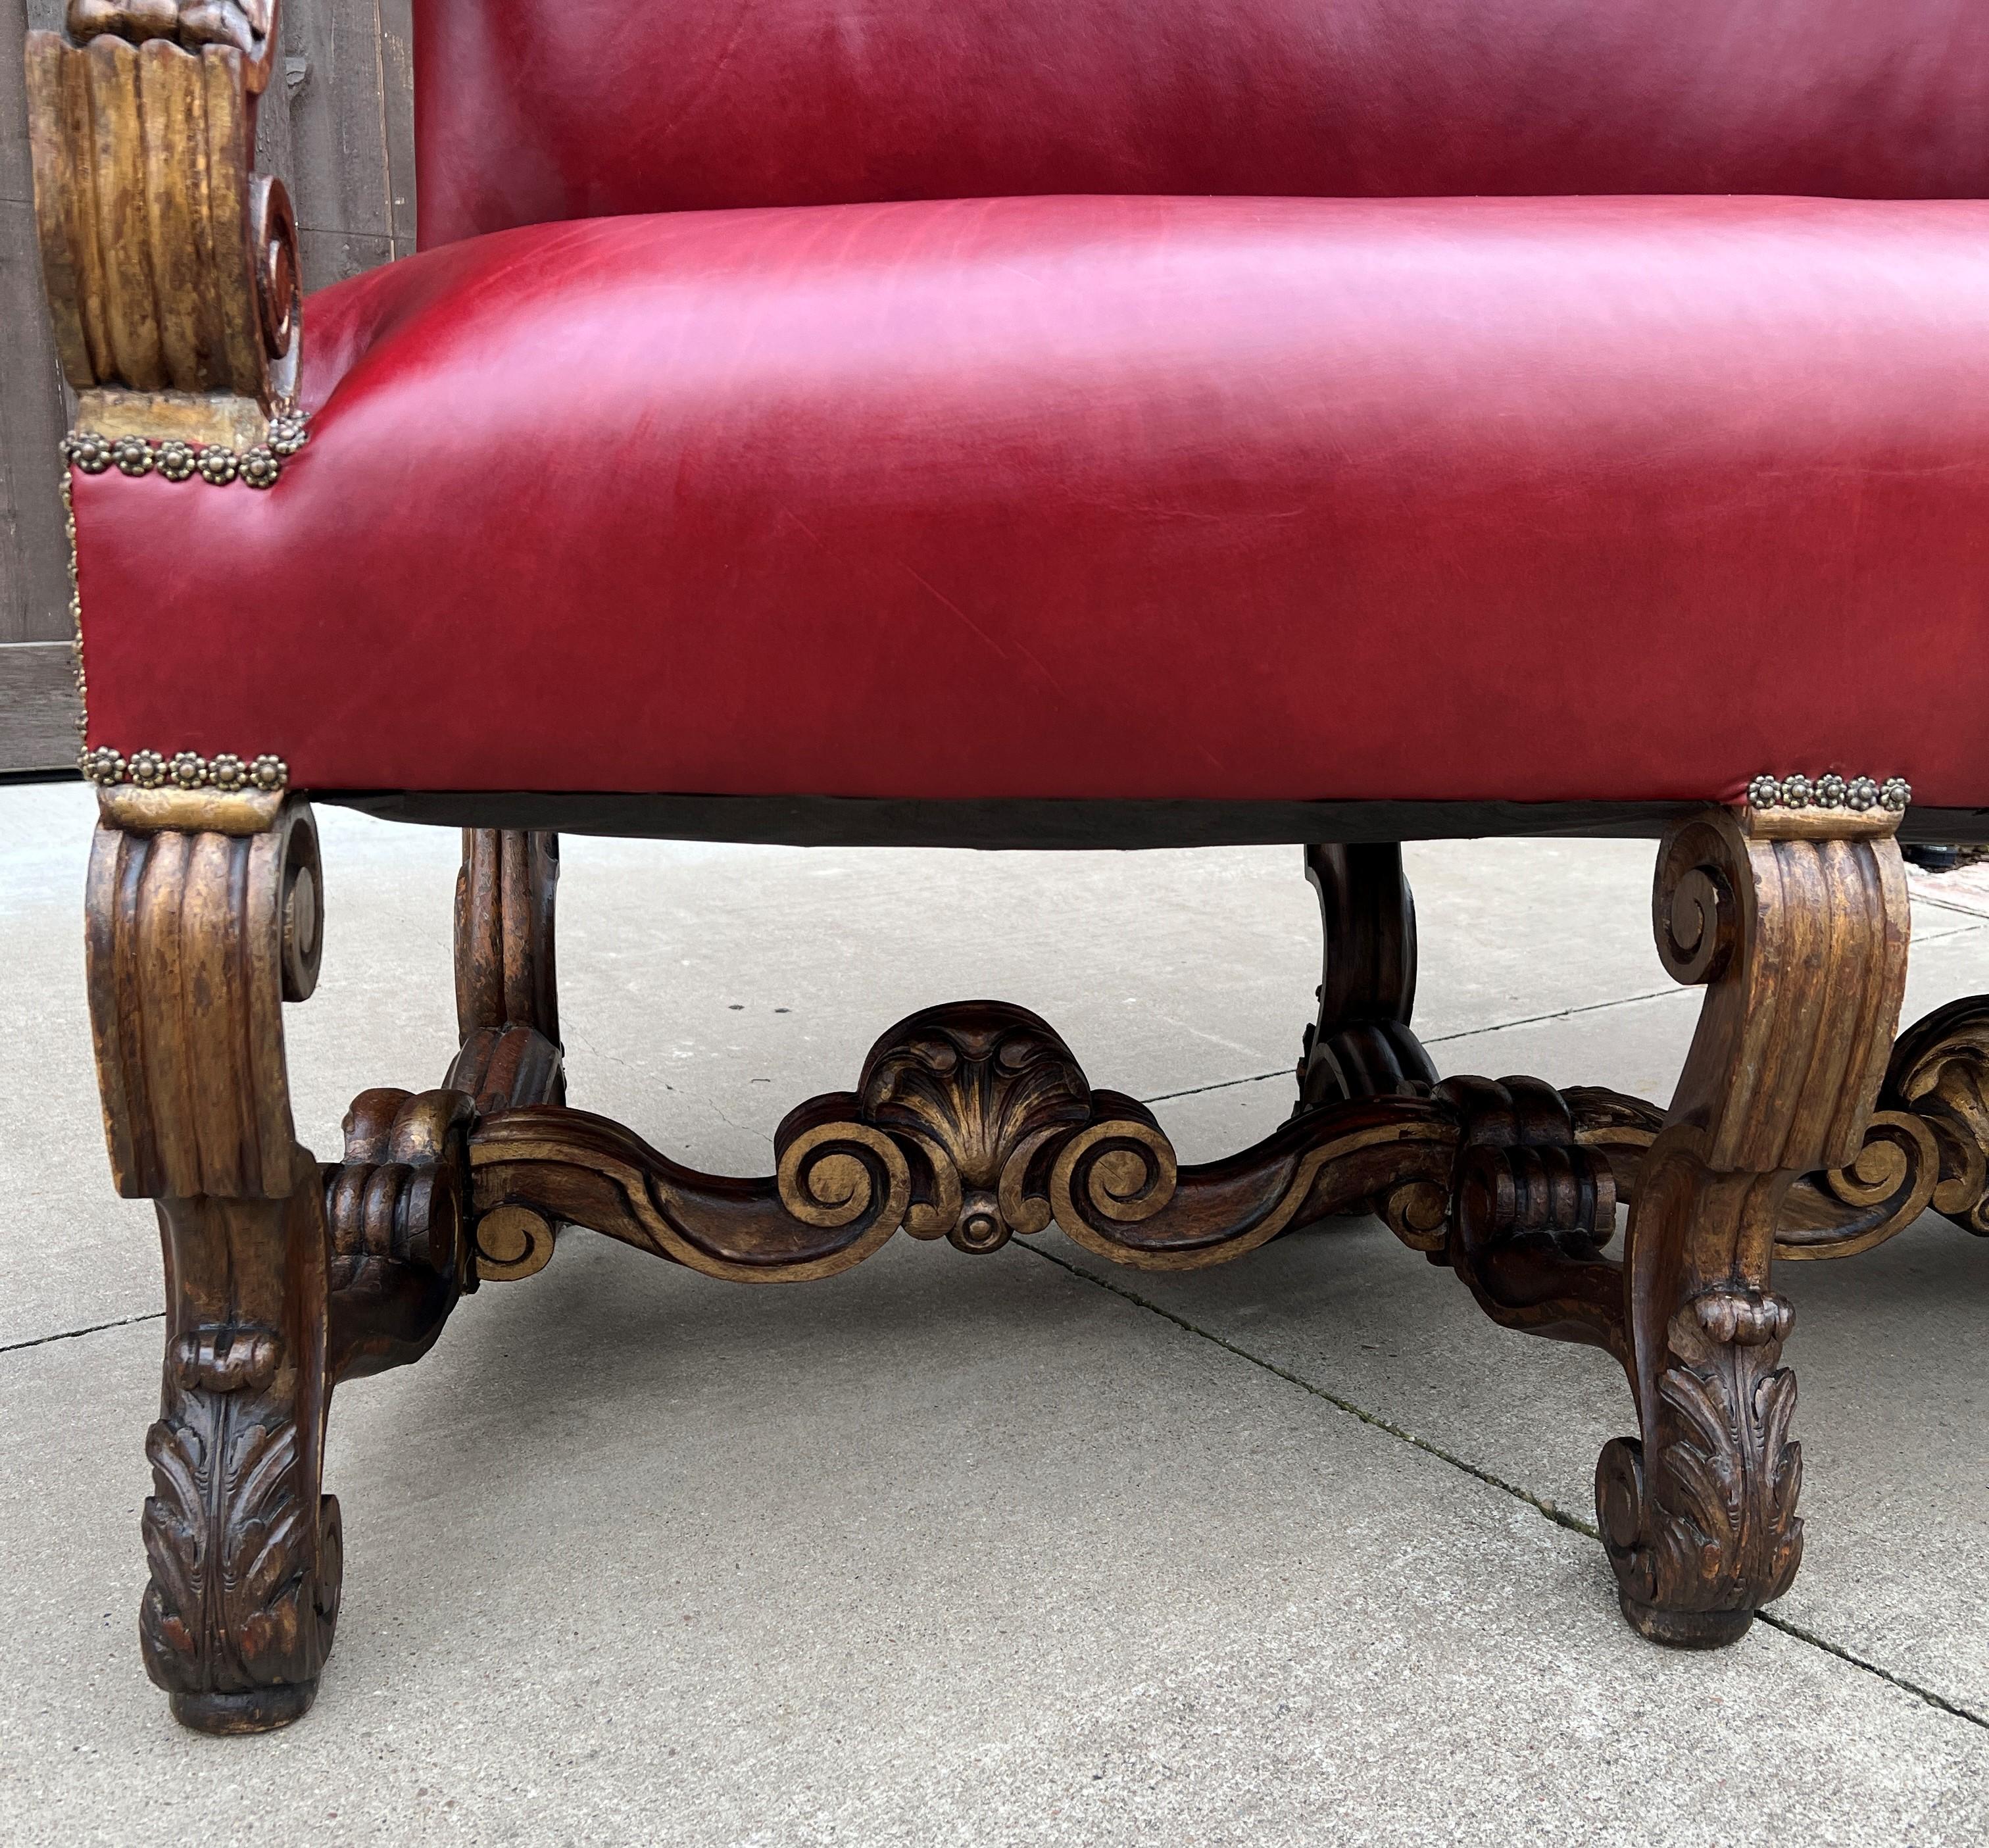 Country Antique Sofa Bench Settee Loveseat Chair Red Upholstery Oak Western Farmhouse For Sale